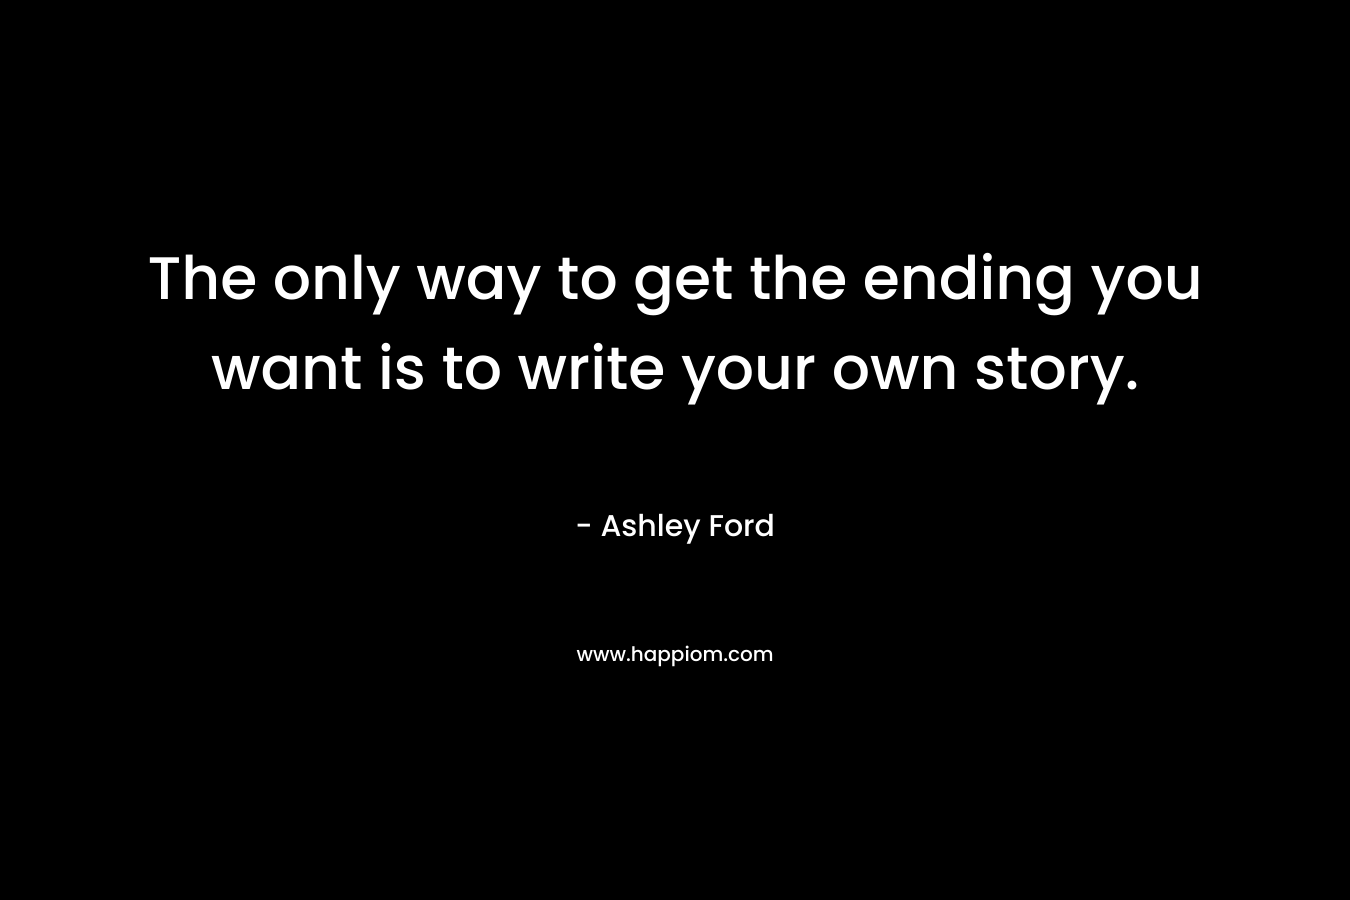 The only way to get the ending you want is to write your own story.